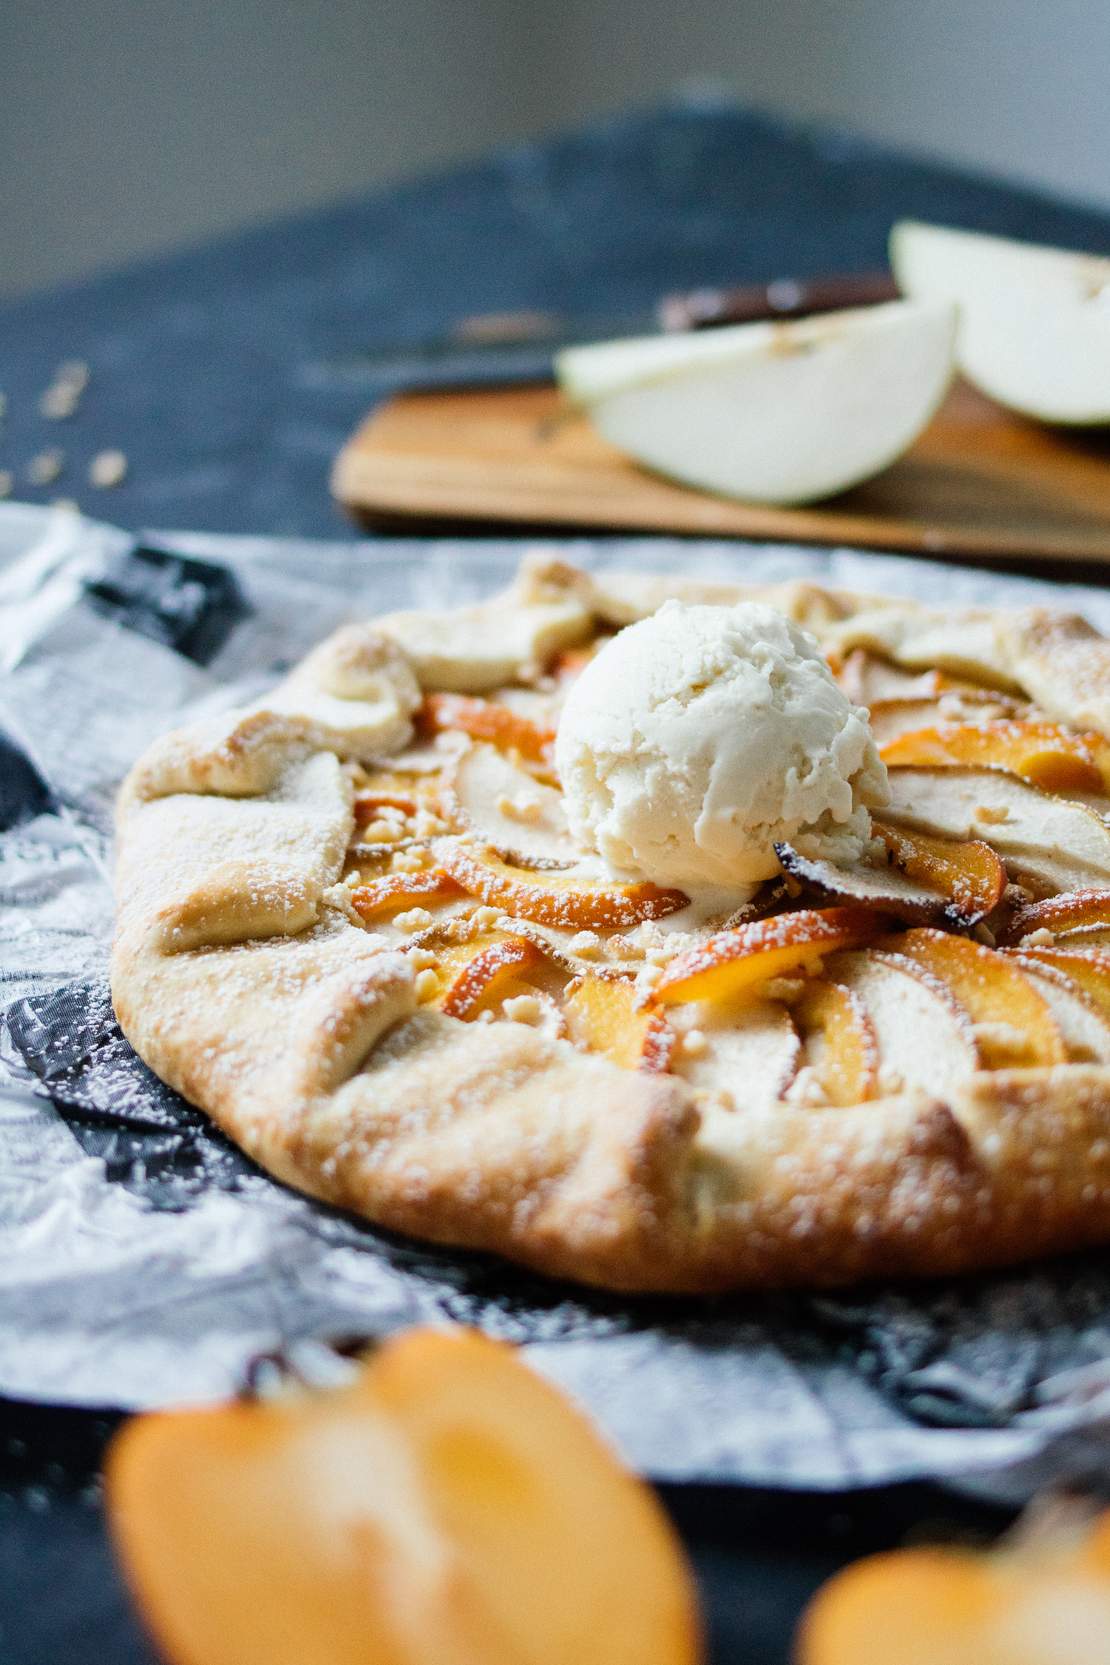 R353 Vegan galette with pear & persimmon